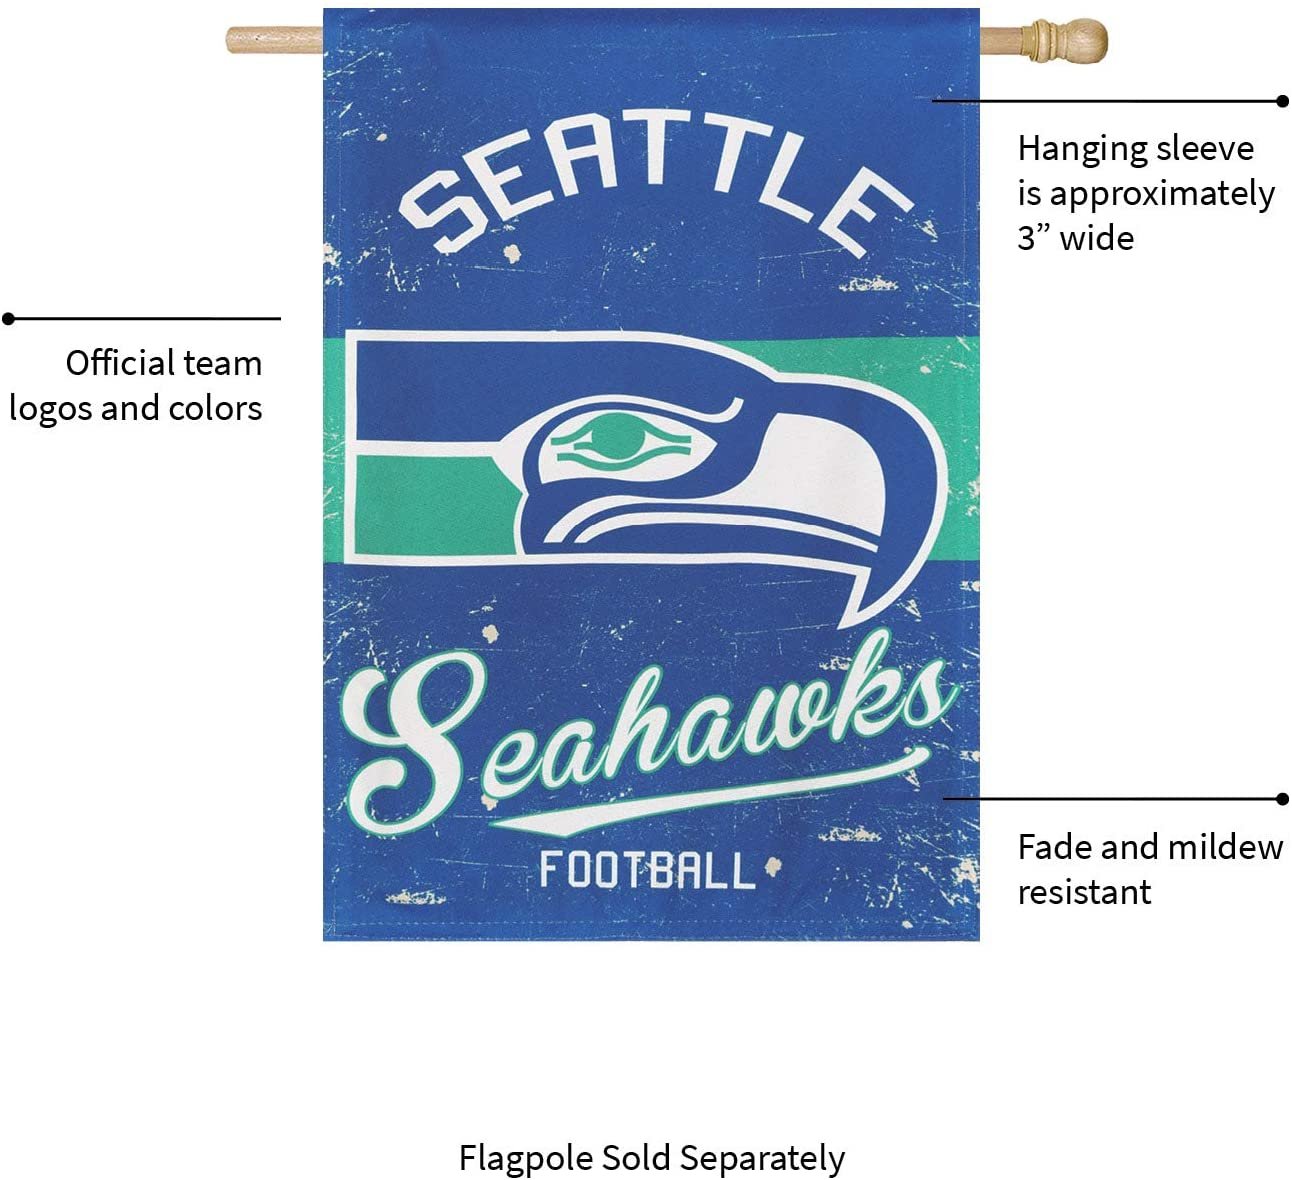 Seattle Seahawks House Banner Flag, Premium Double Sided, 28x44 Inch, Vintage Design, Linen, Indoor Outdoor